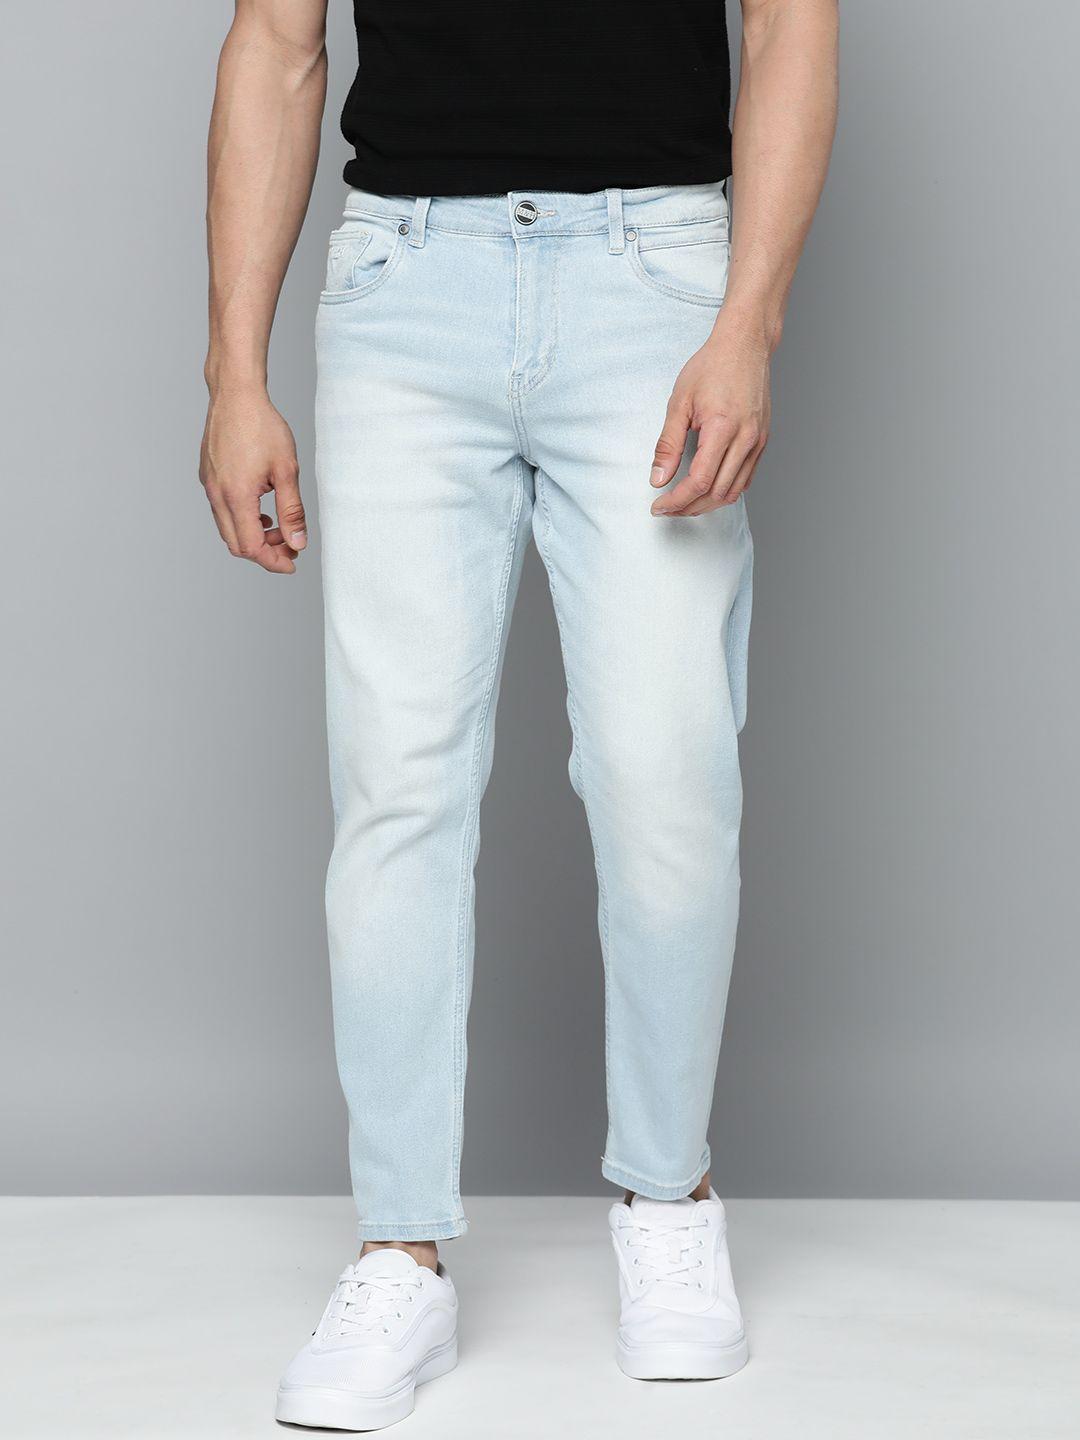 mast & harbour men carrot-fit light fade stretchable jeans